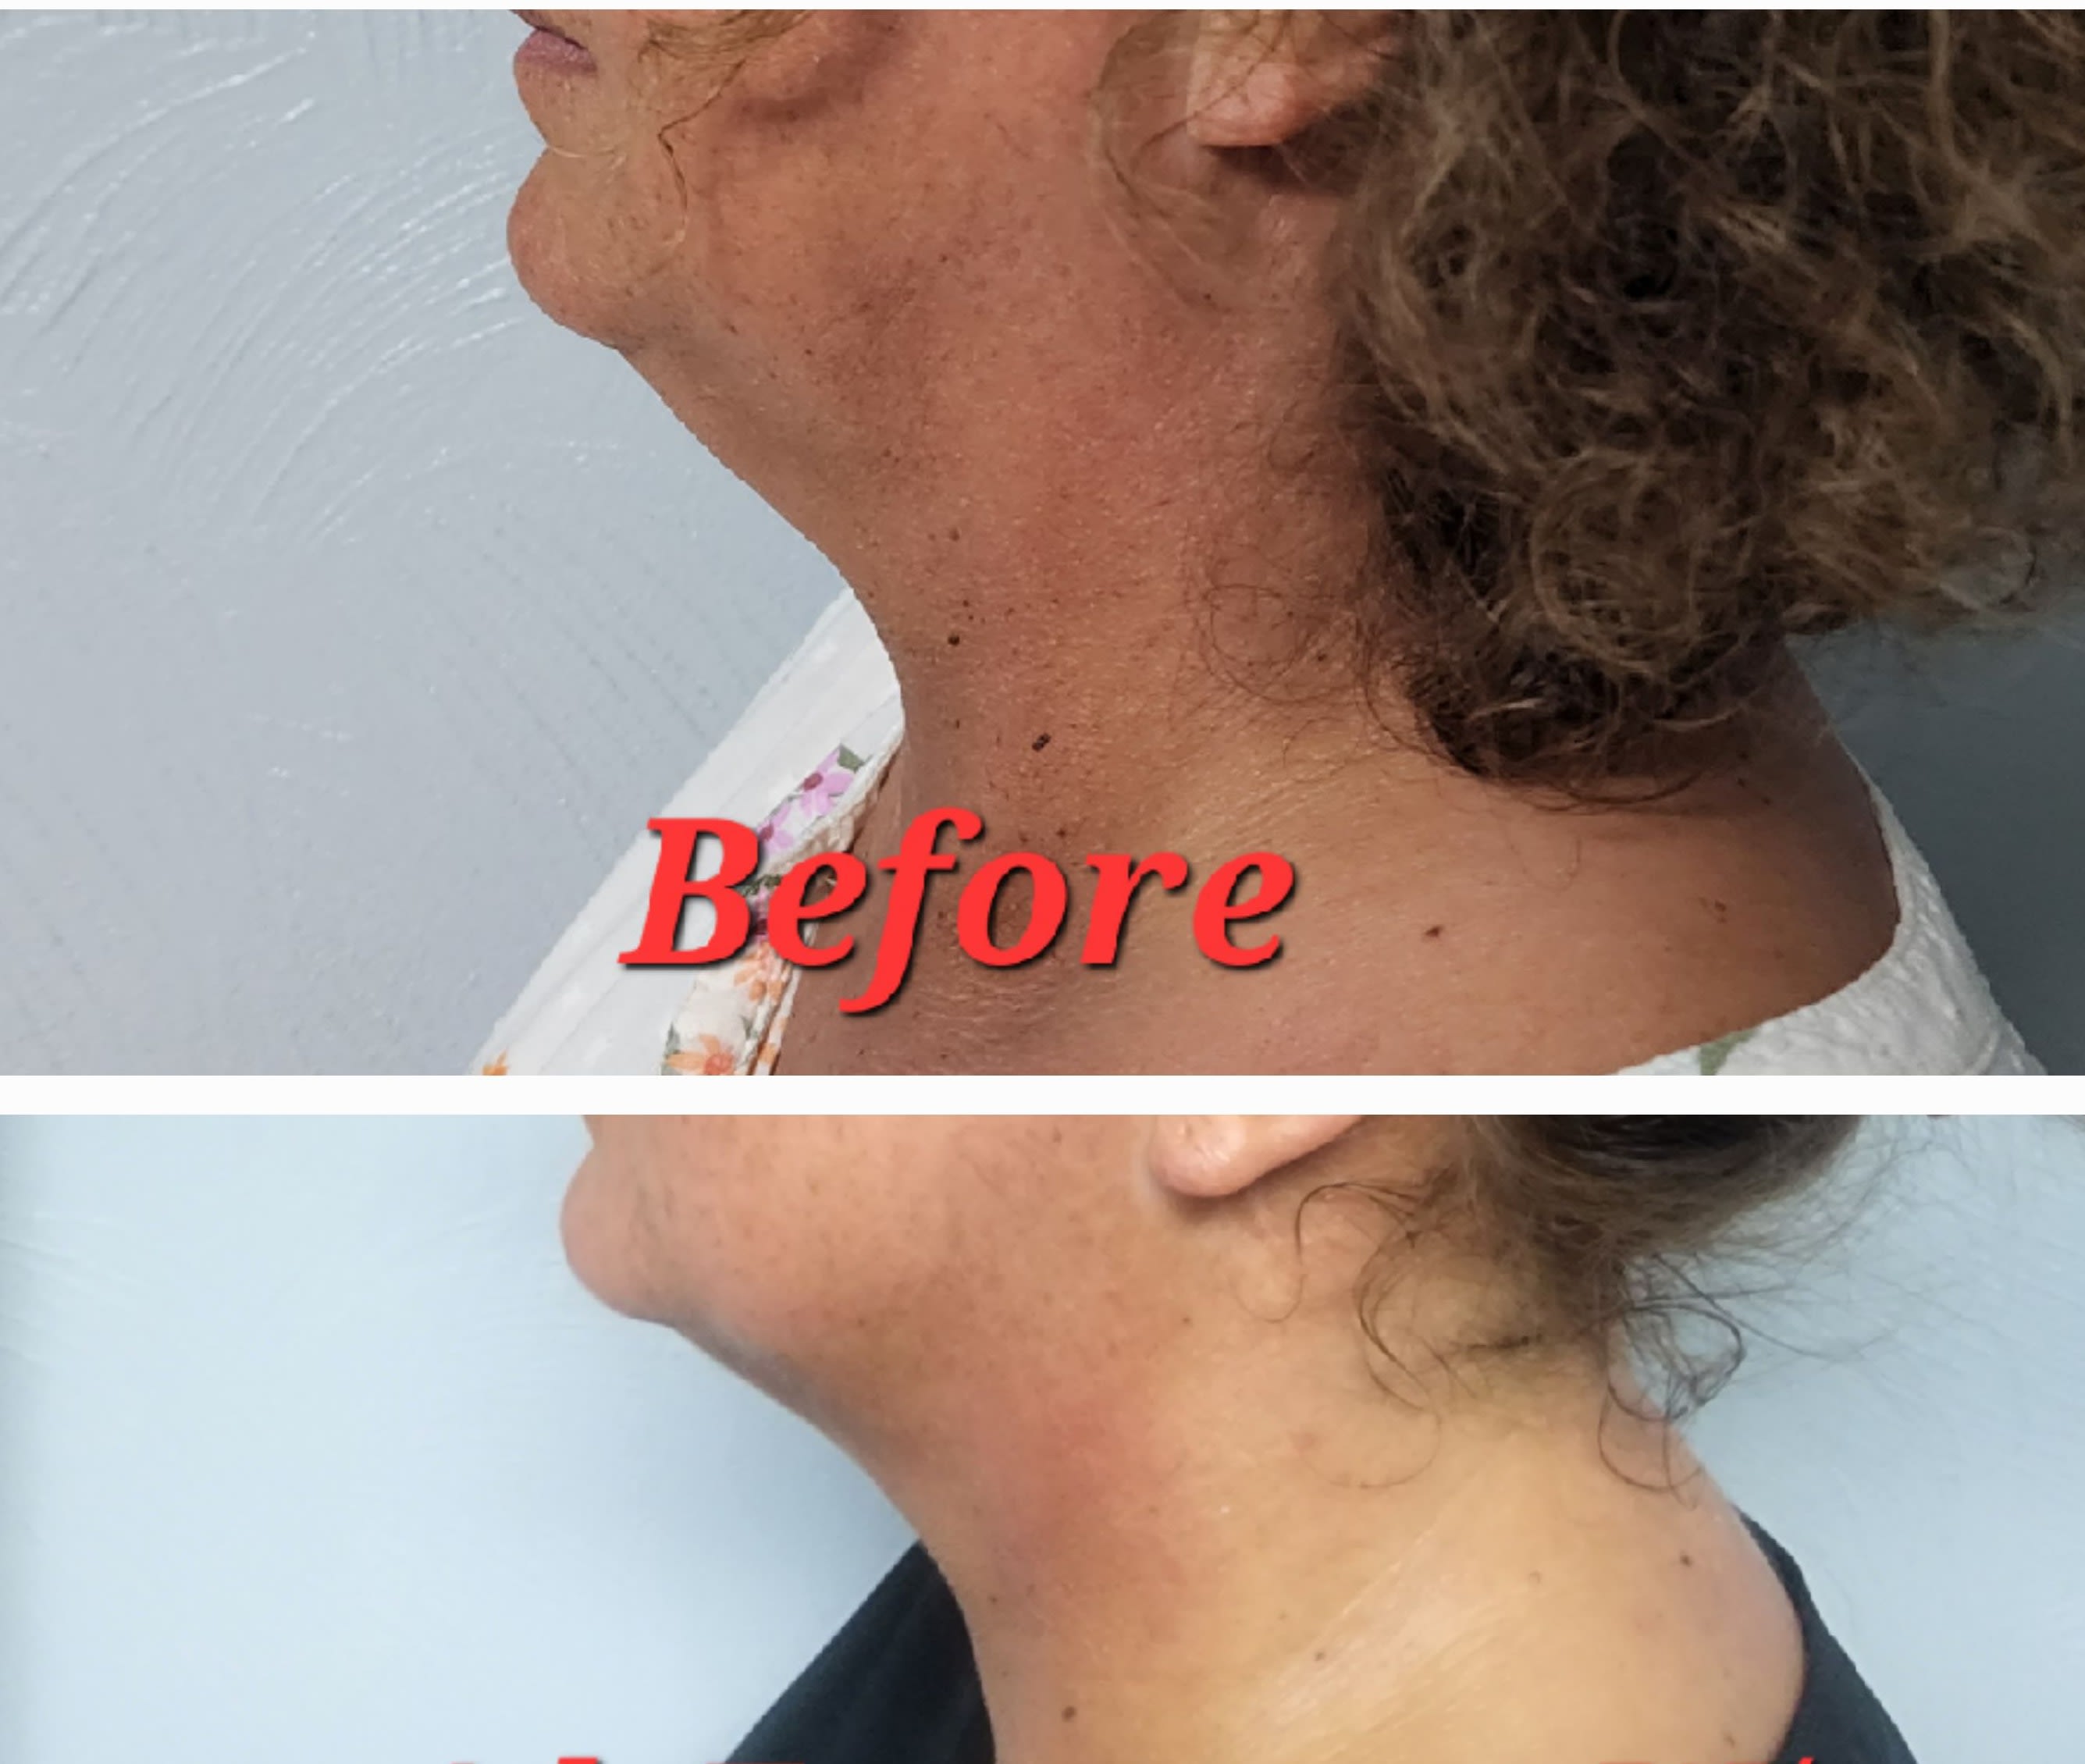 Chin & Neck Reduction - Body Sculpting - Simply Sculpted - Body